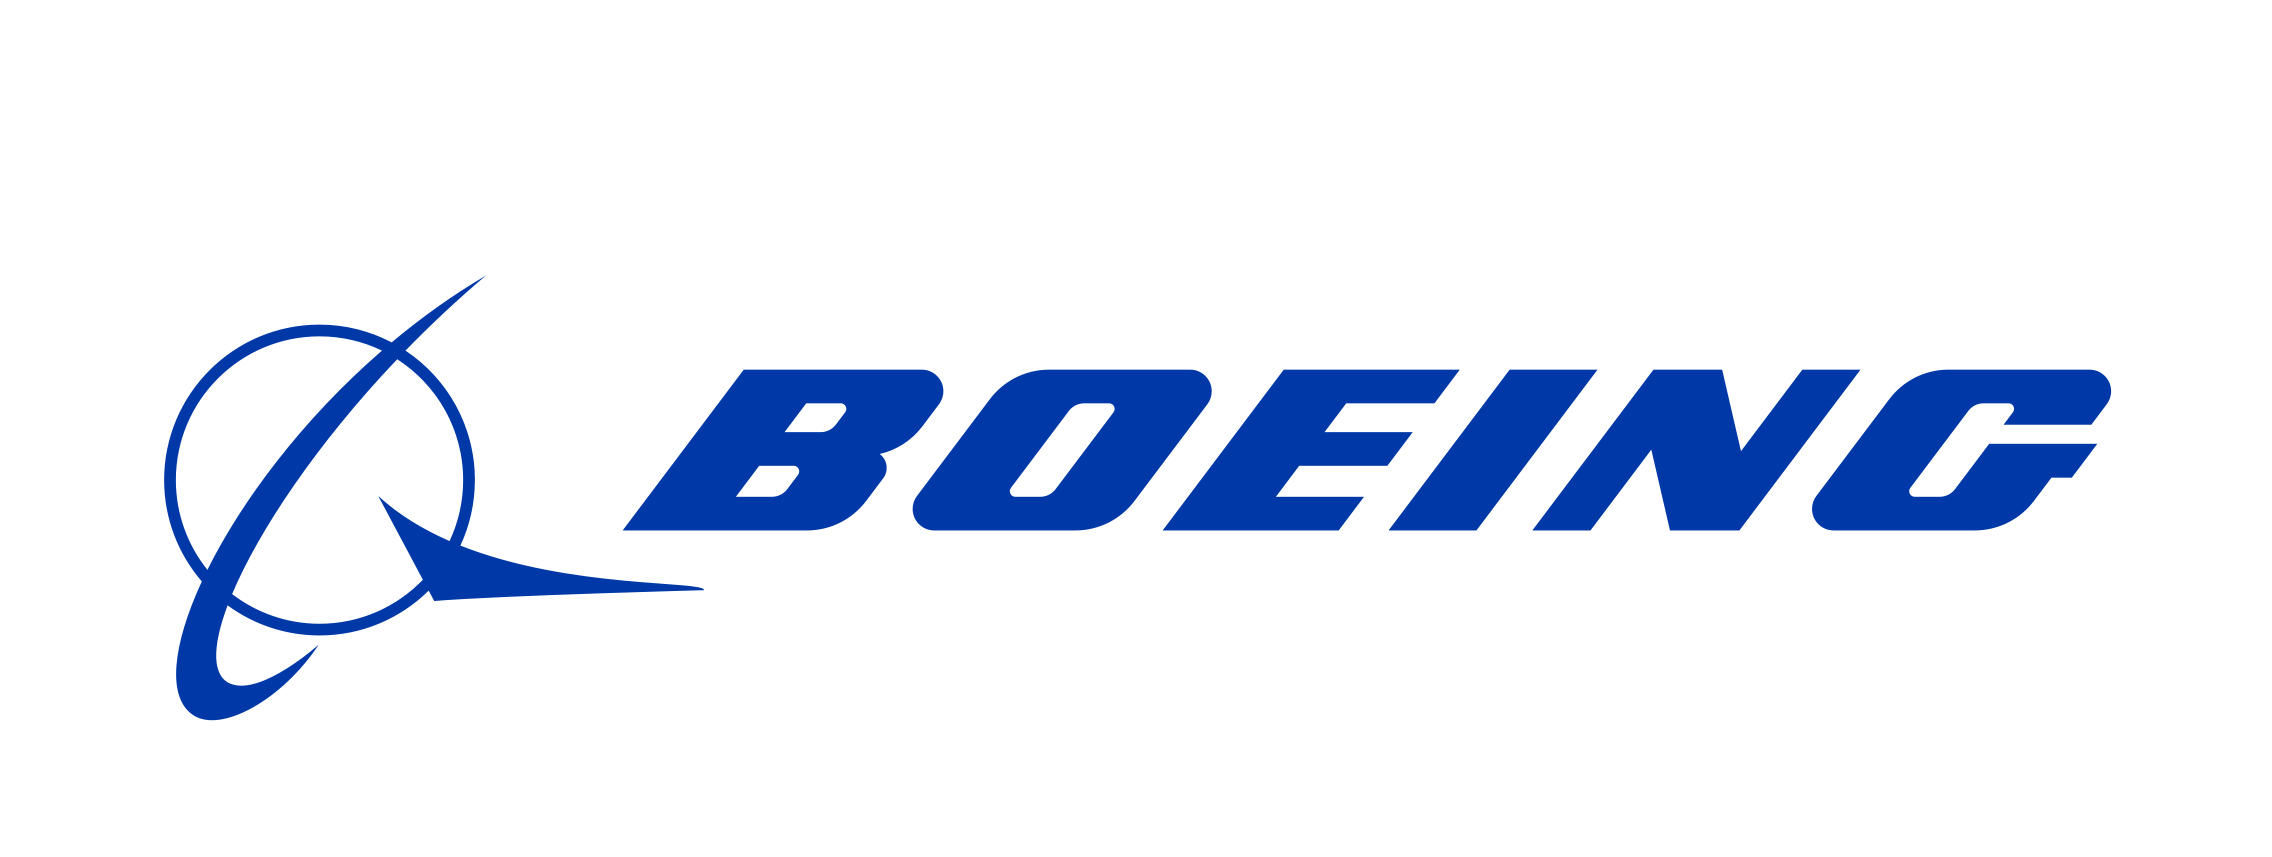 Boeing makes one of the largest acquisitions in Industrial Automation: 3.2 billion dollars